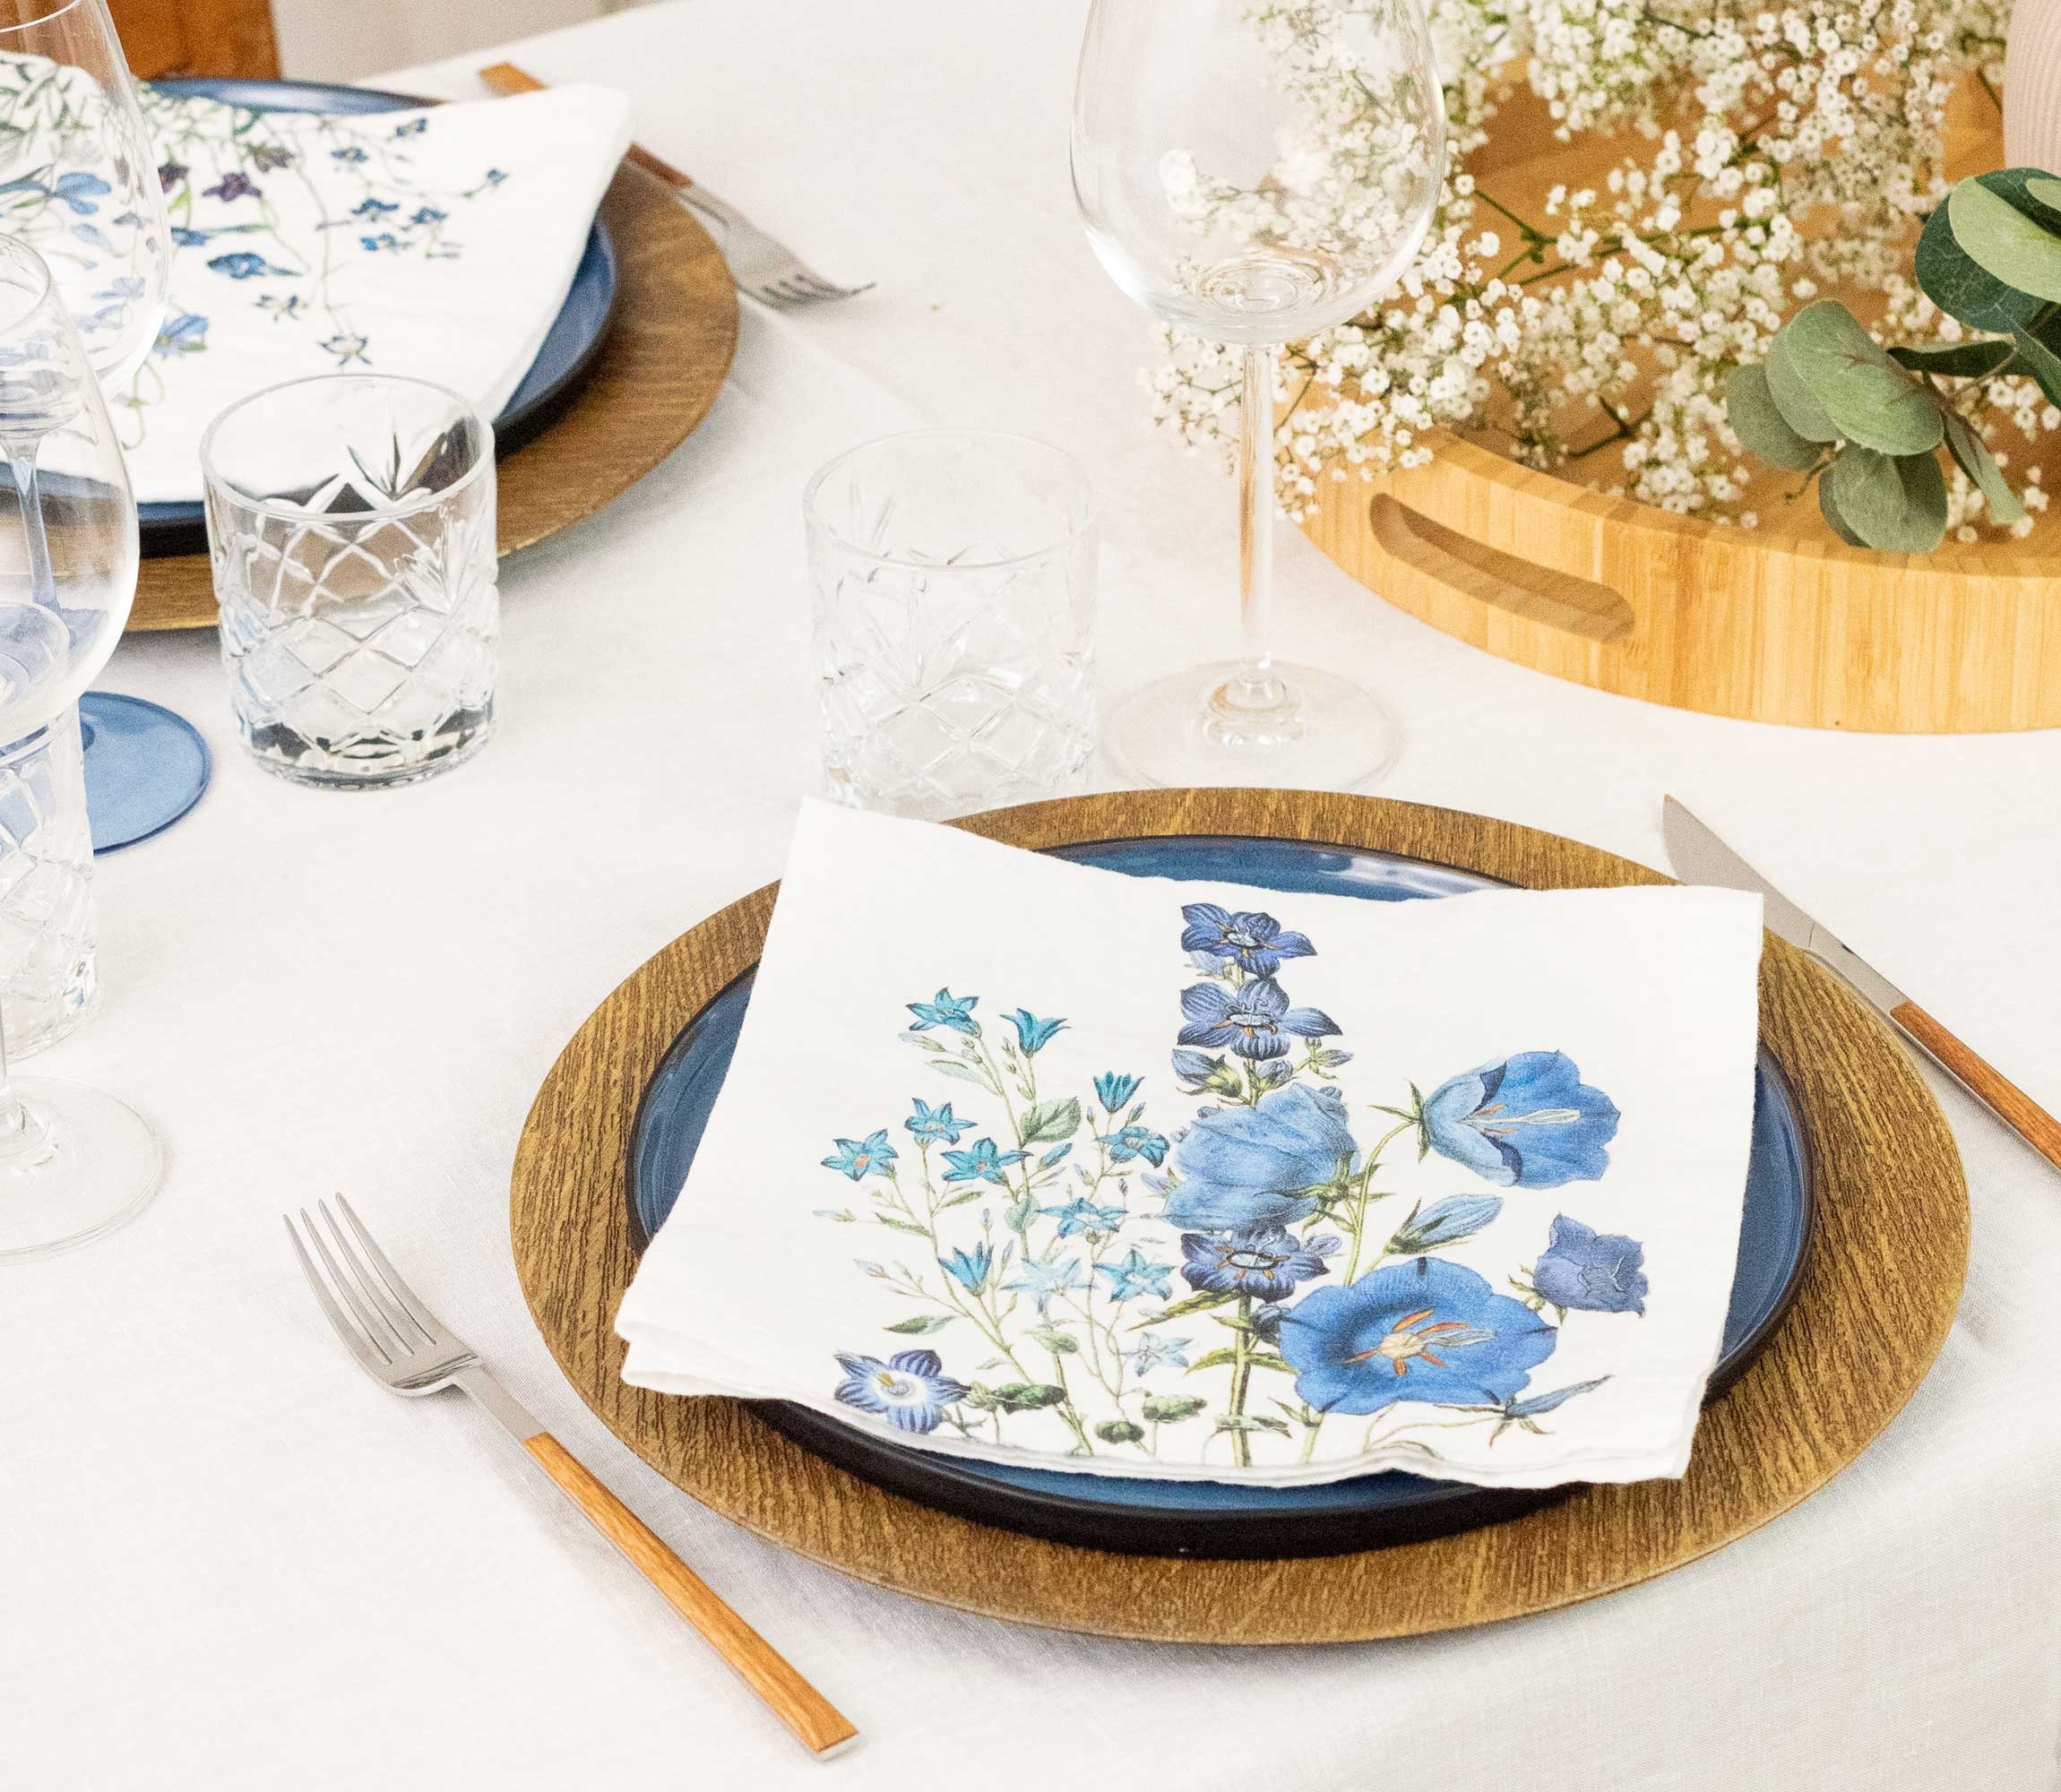 Cloth Napkins Table Linens Dinner Napkins 18”x18 Off White and Blue Cotton  Floral Fabric Set of 4